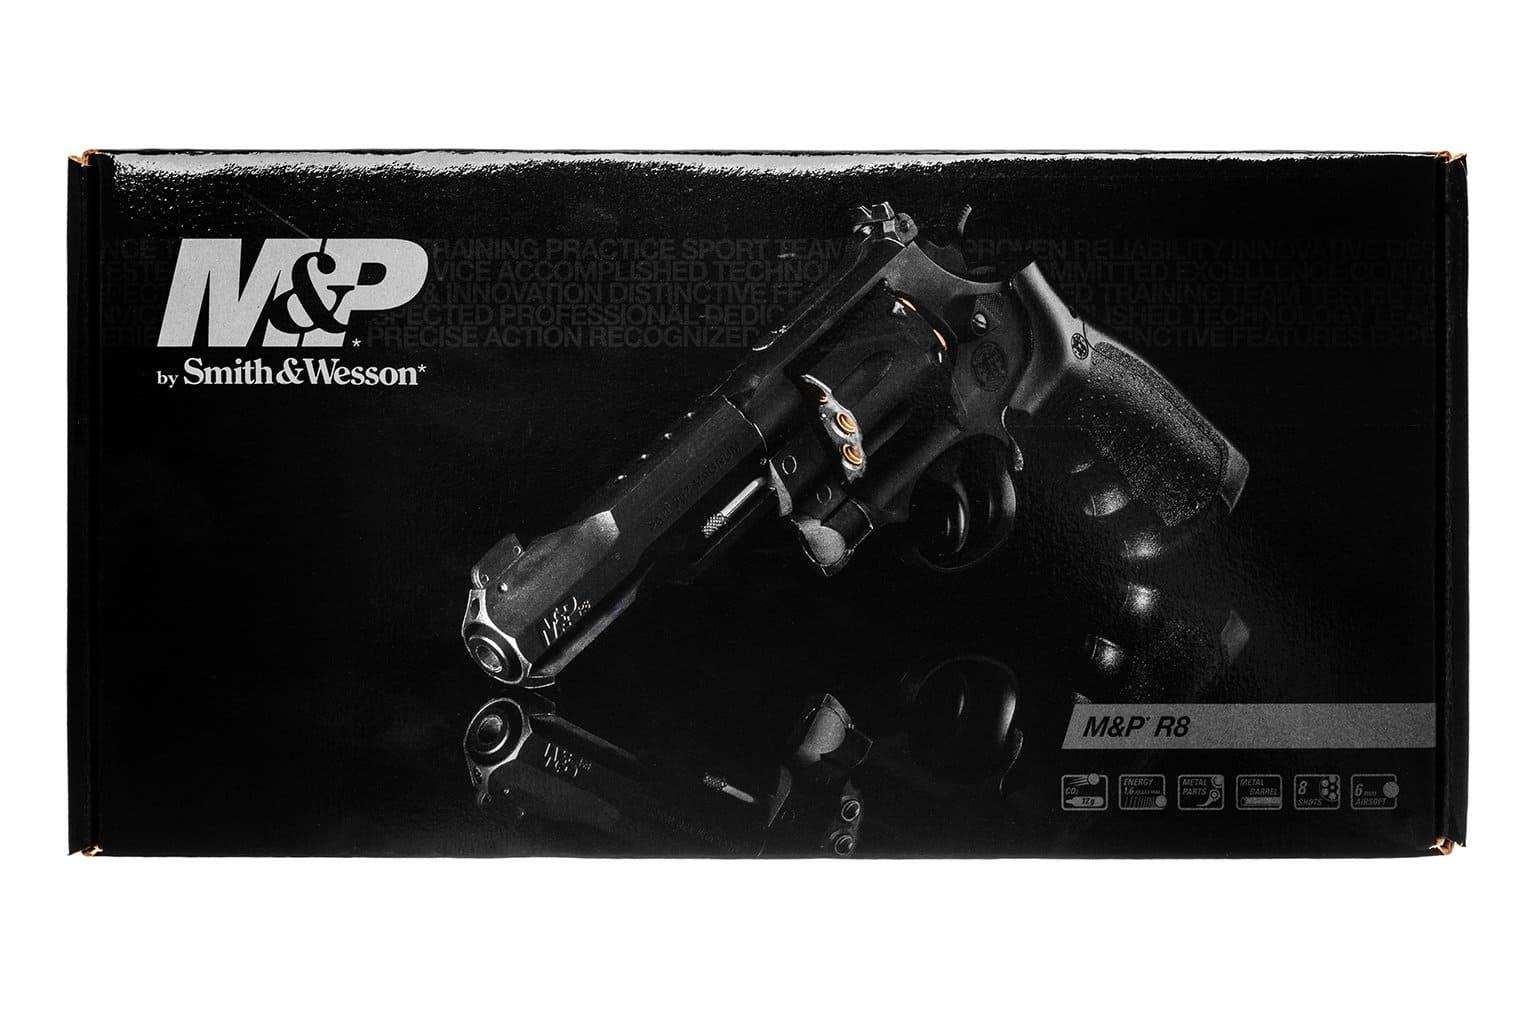 Smith & Wesson M&P R8 cal. 6 mm BB 